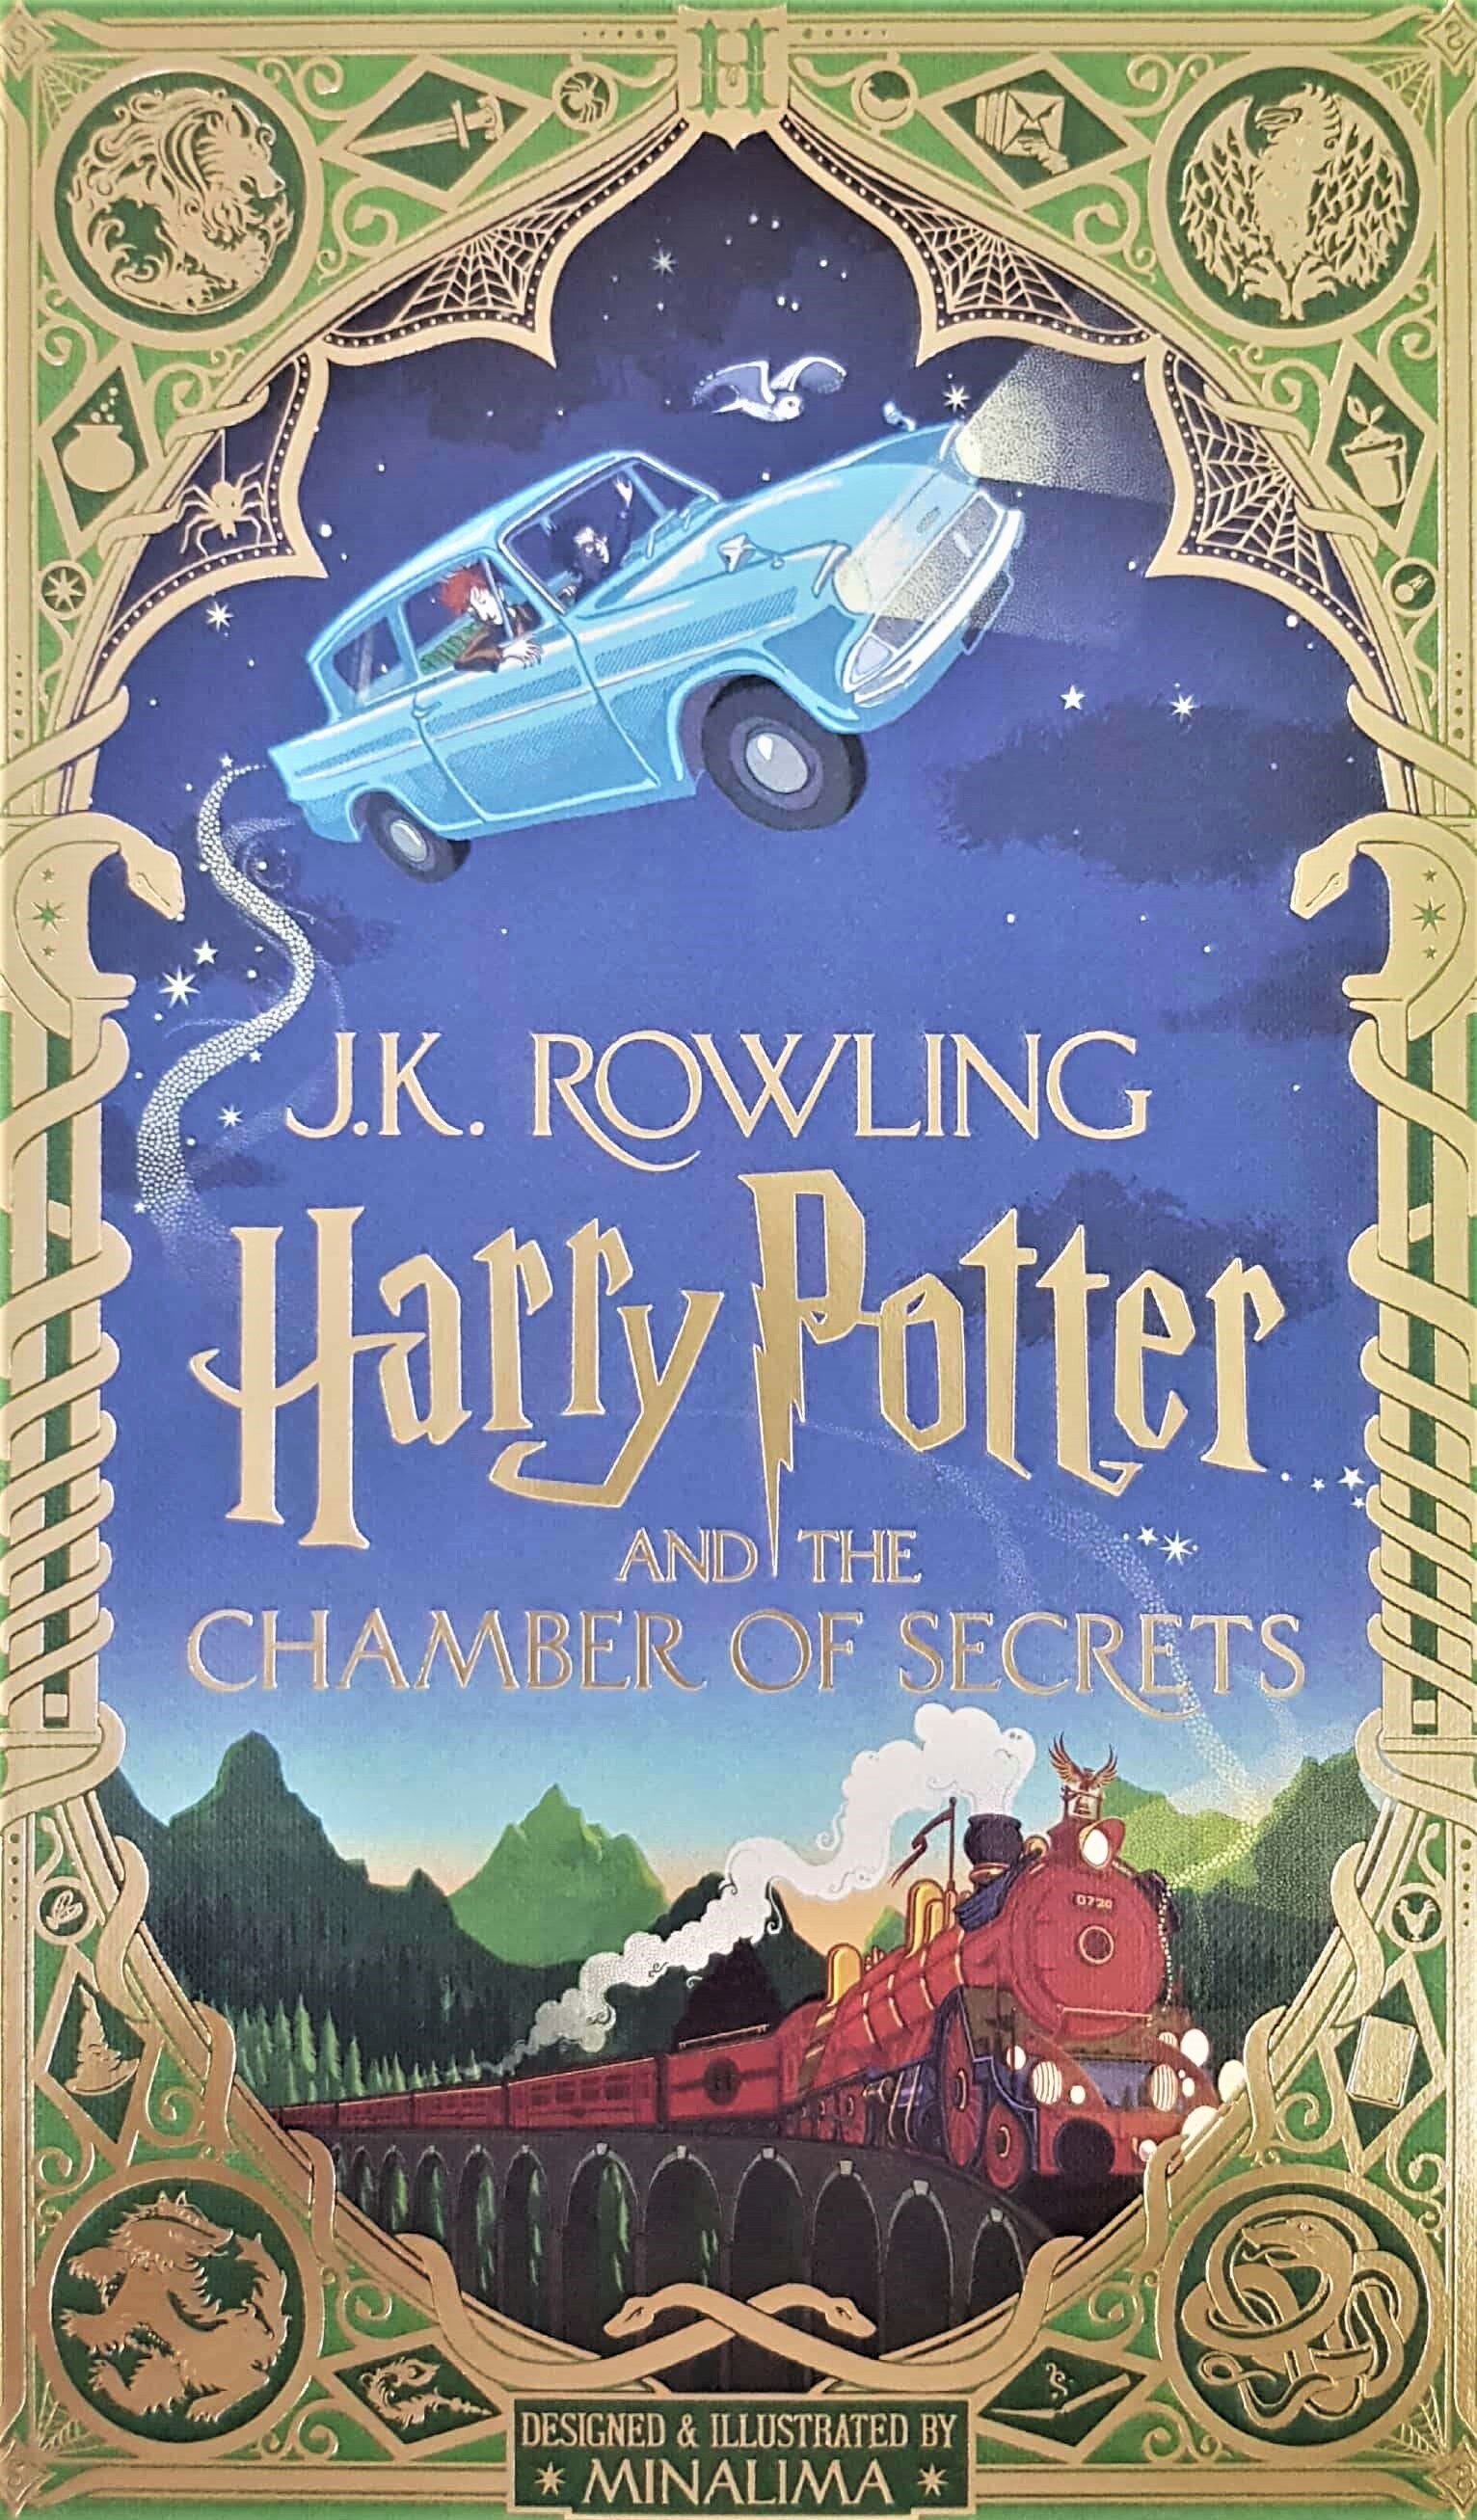 Harry Potter and the Chamber of Secrets, MinaLima edition